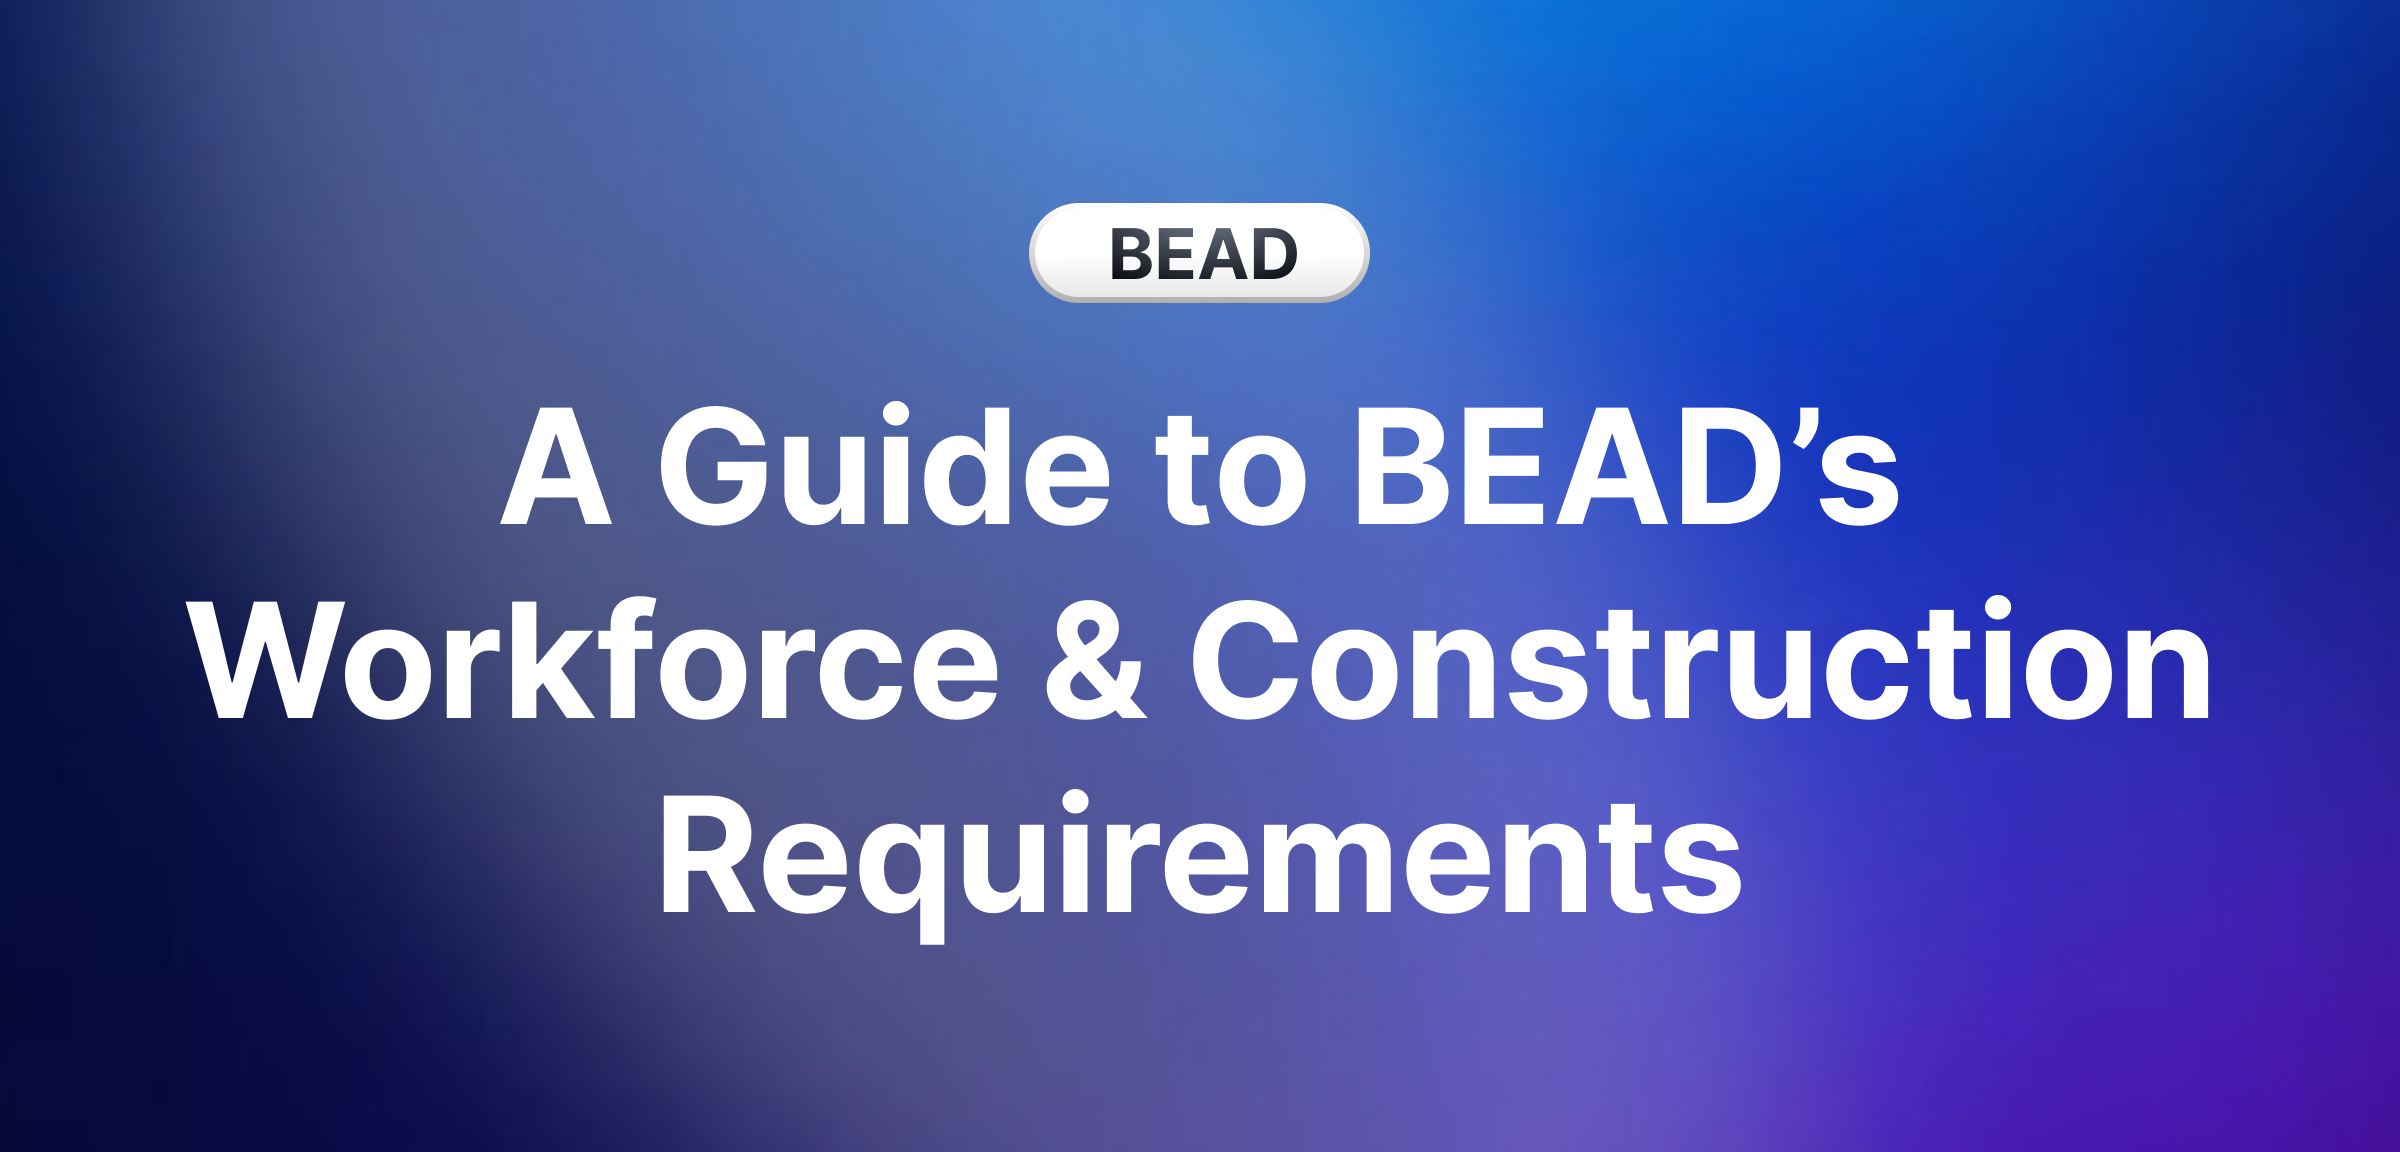 Guide to BEAD Workforce Requirements